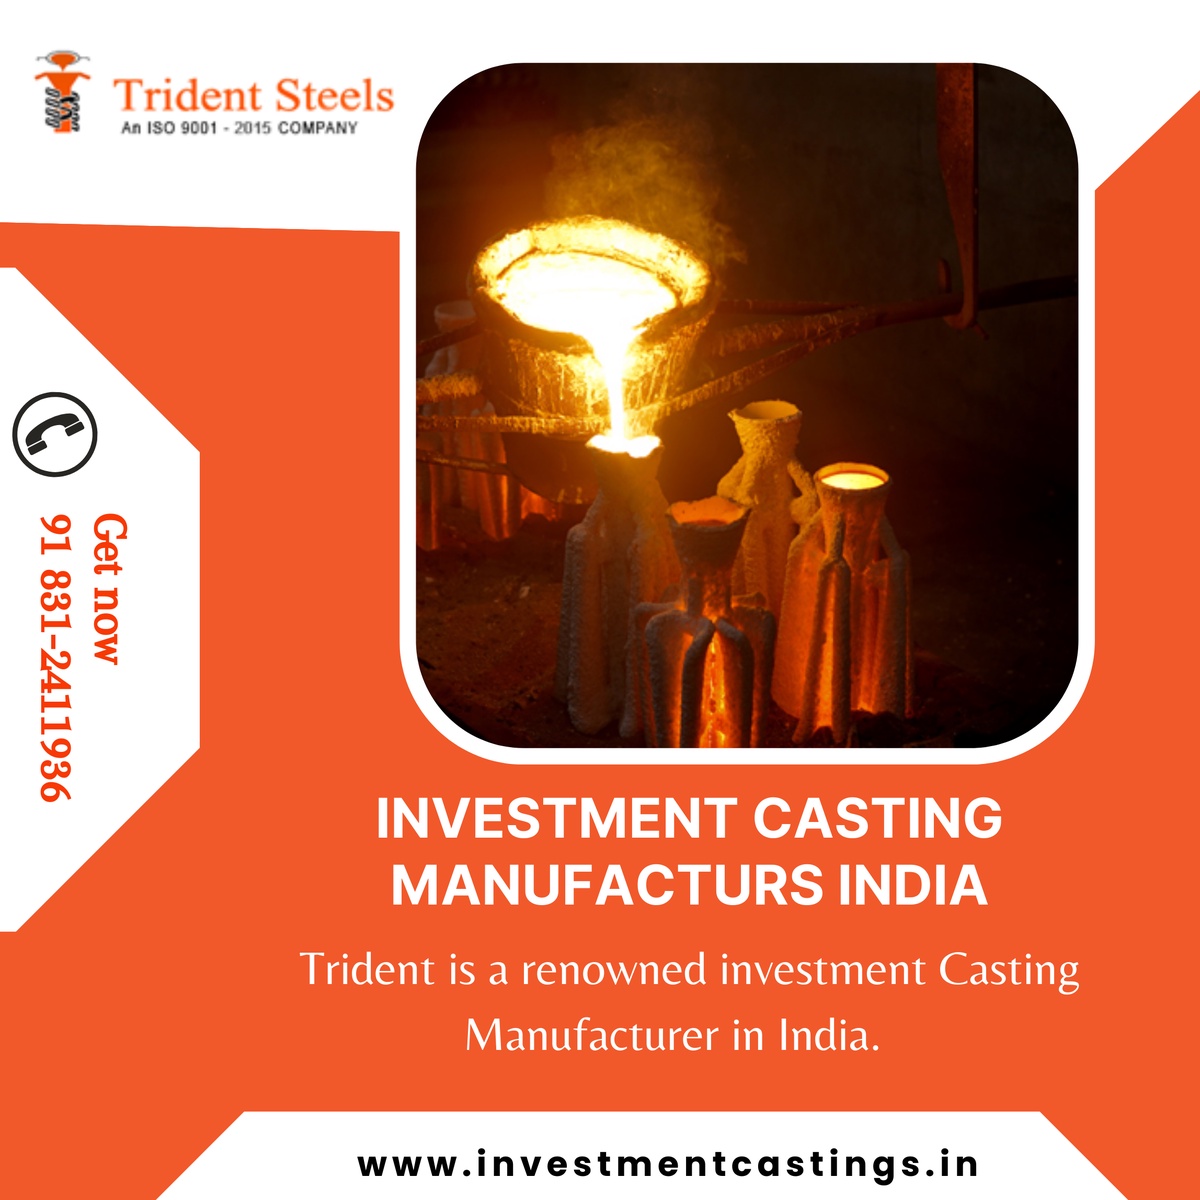 Tridentsteels-Investment Casting Manufacturers in India